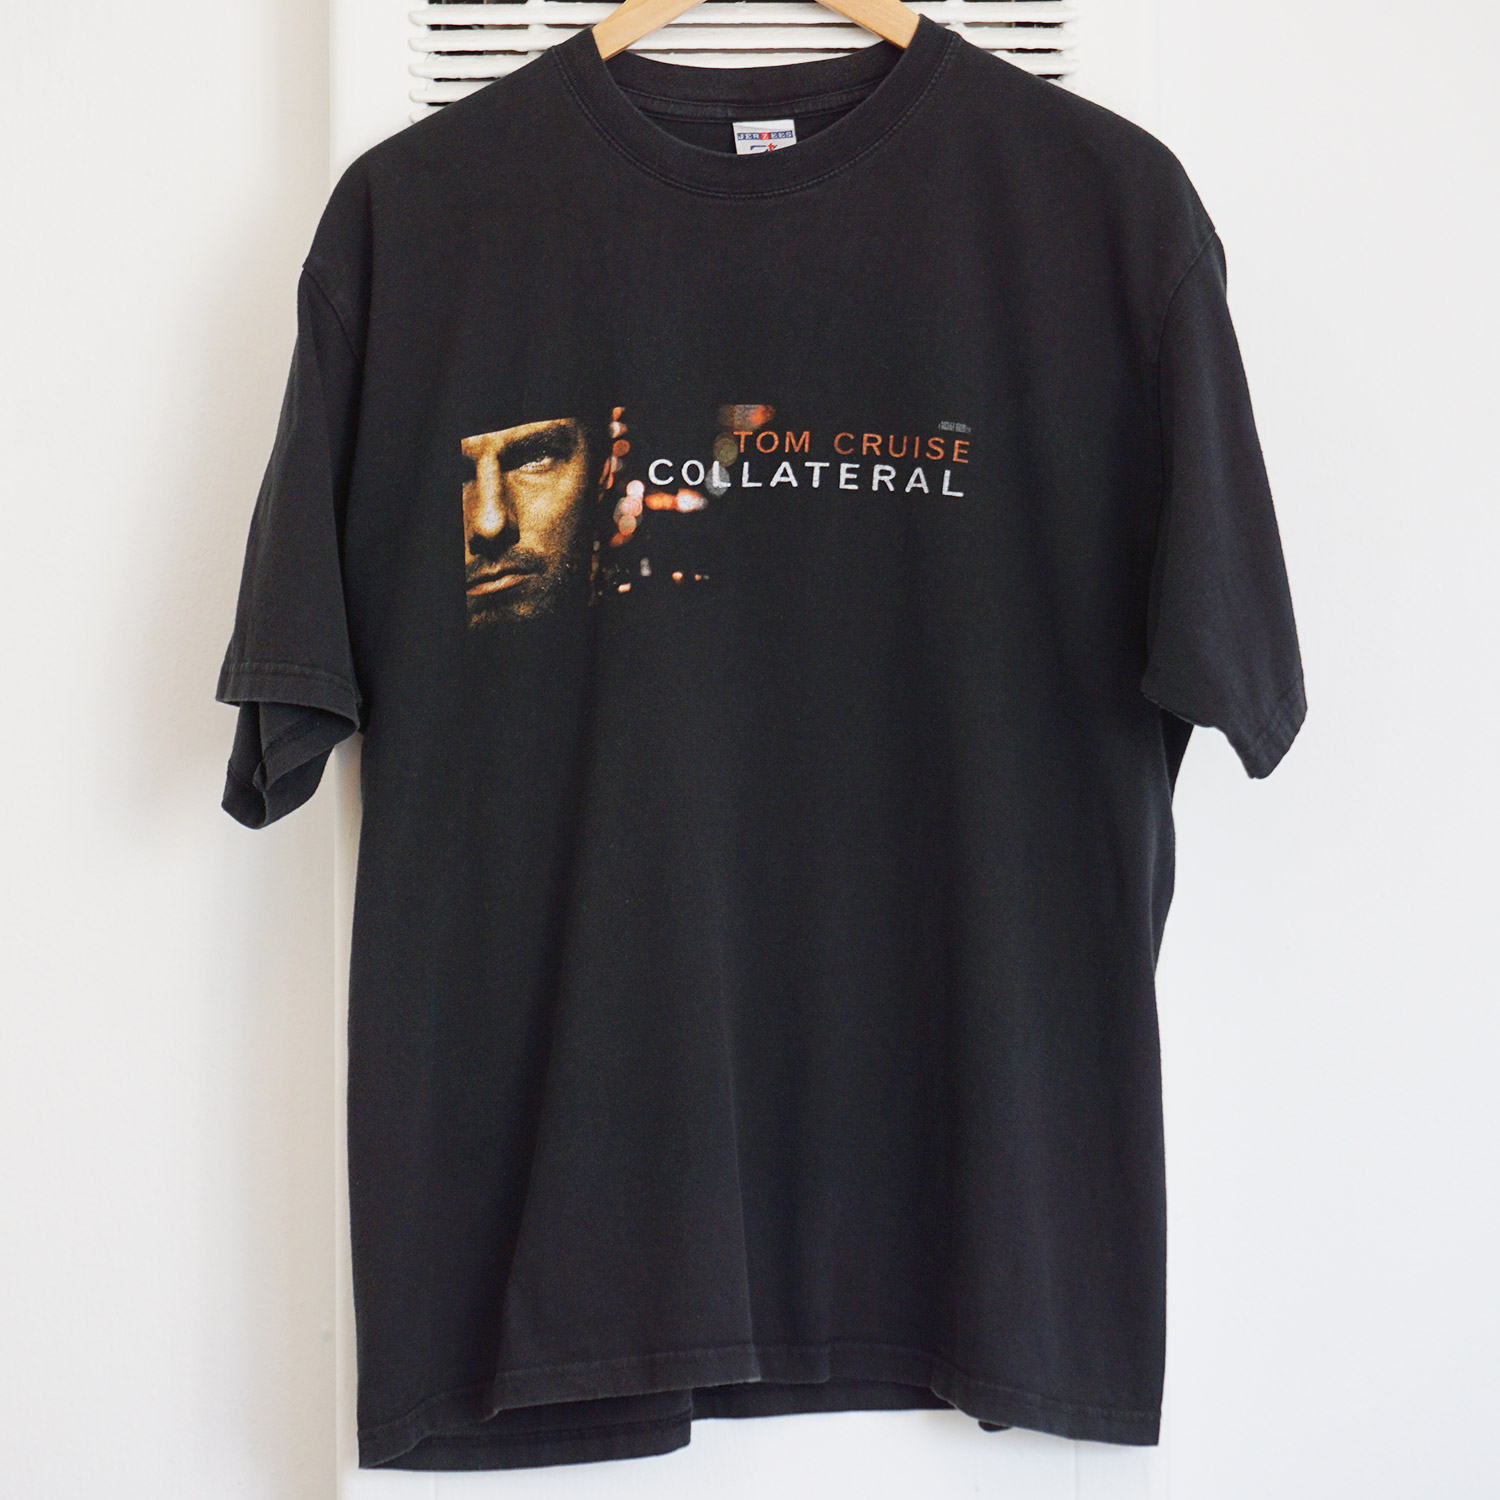 Collateral T-shirt